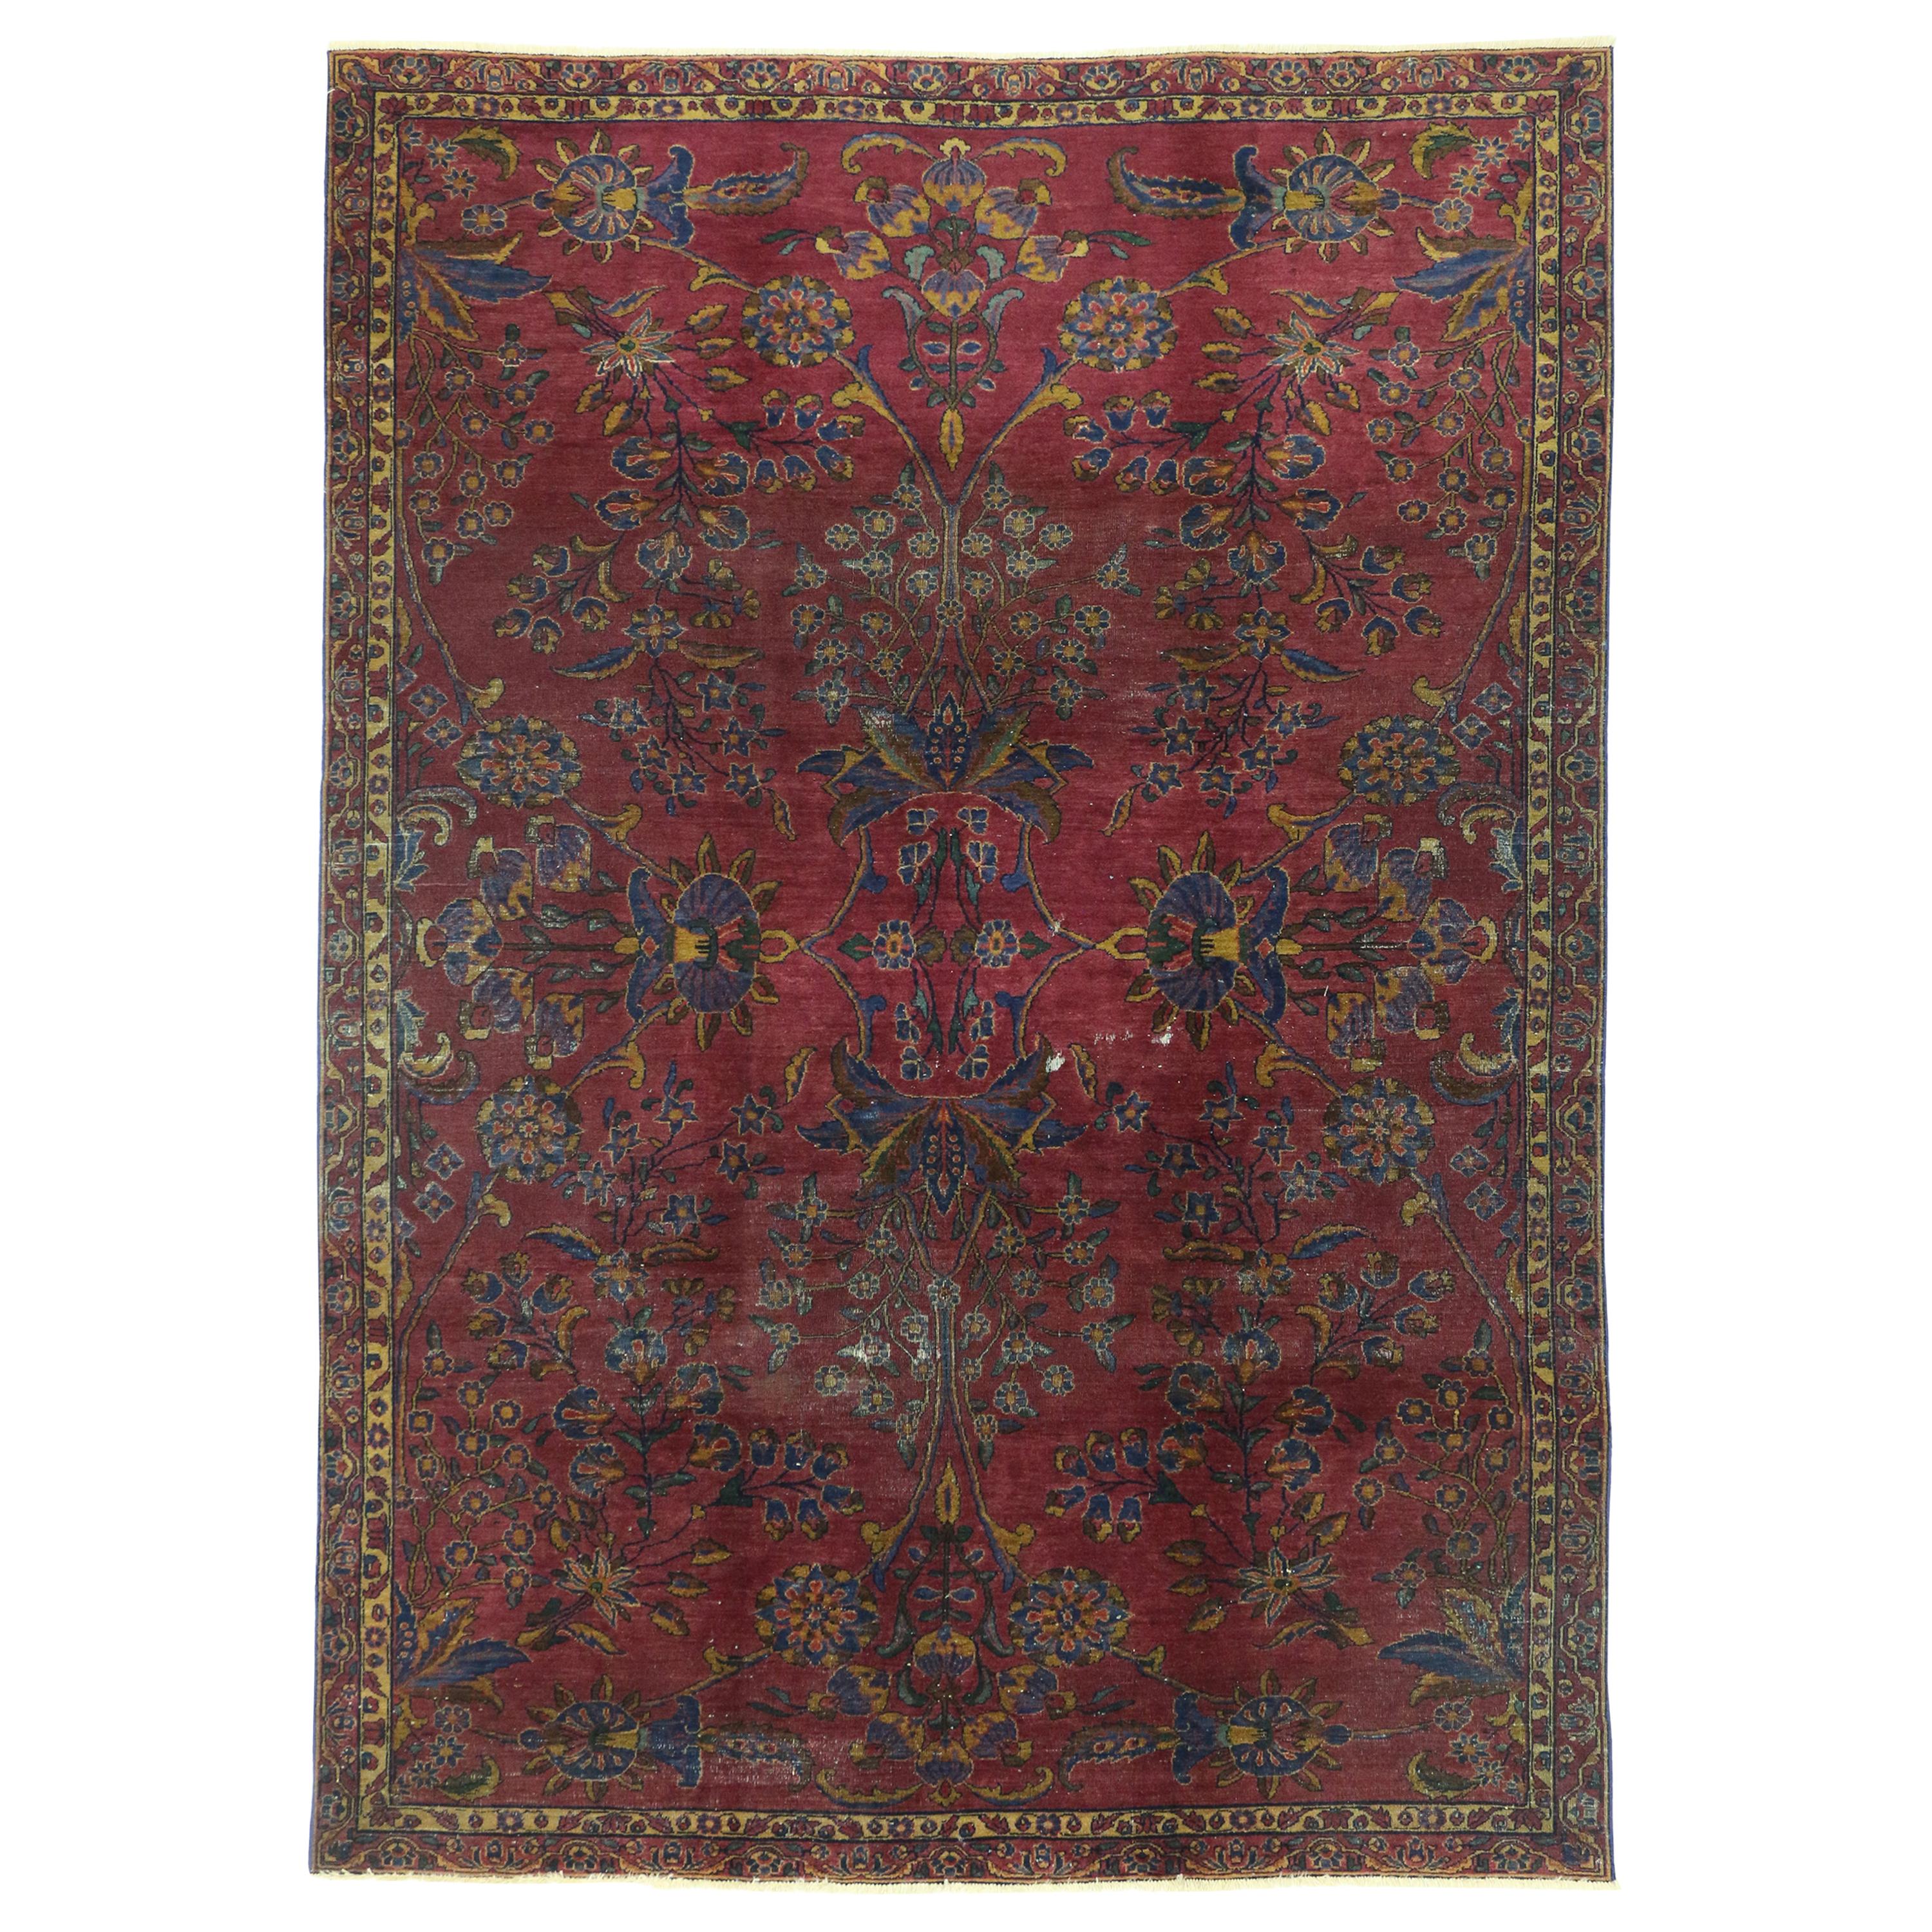 Distressed Burgundy Antique Indian Area Rug with Old World Venetian Style